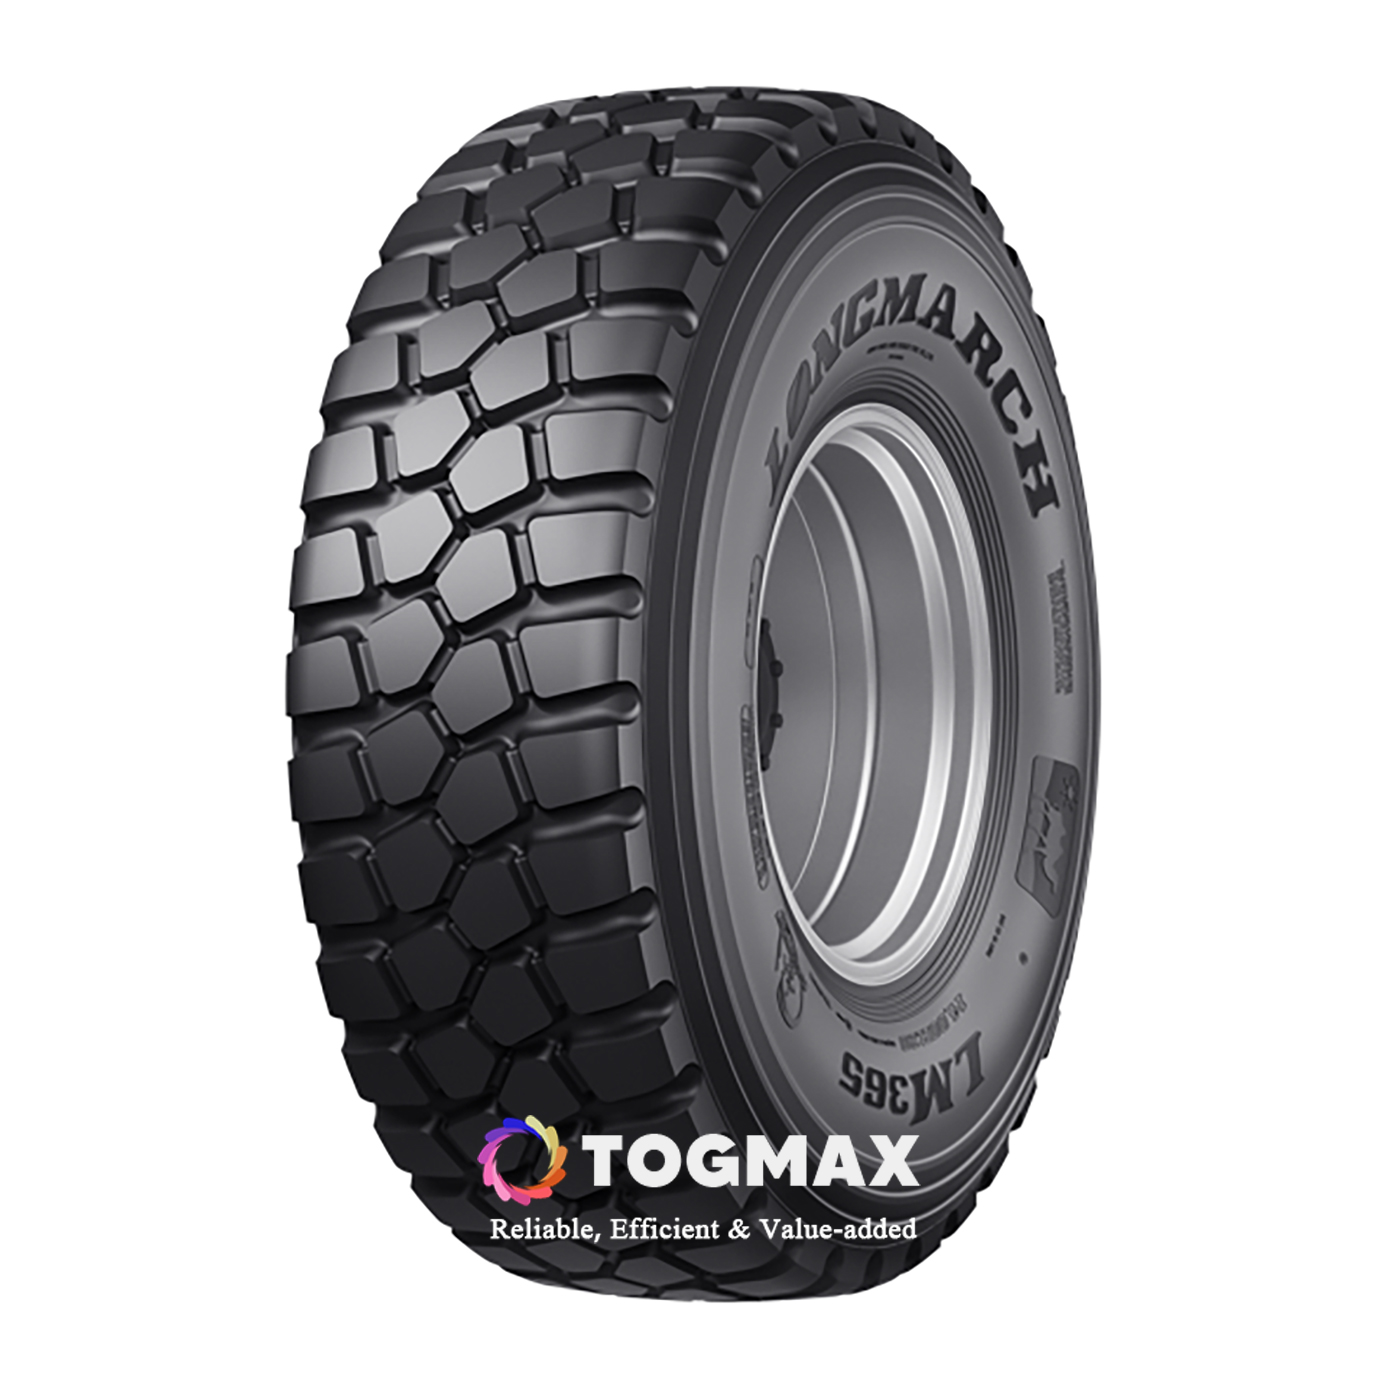 Longmarch MPT Tires 14.00R20, 16.00R20 LM365 MPT Tyres for Off Road Trucks